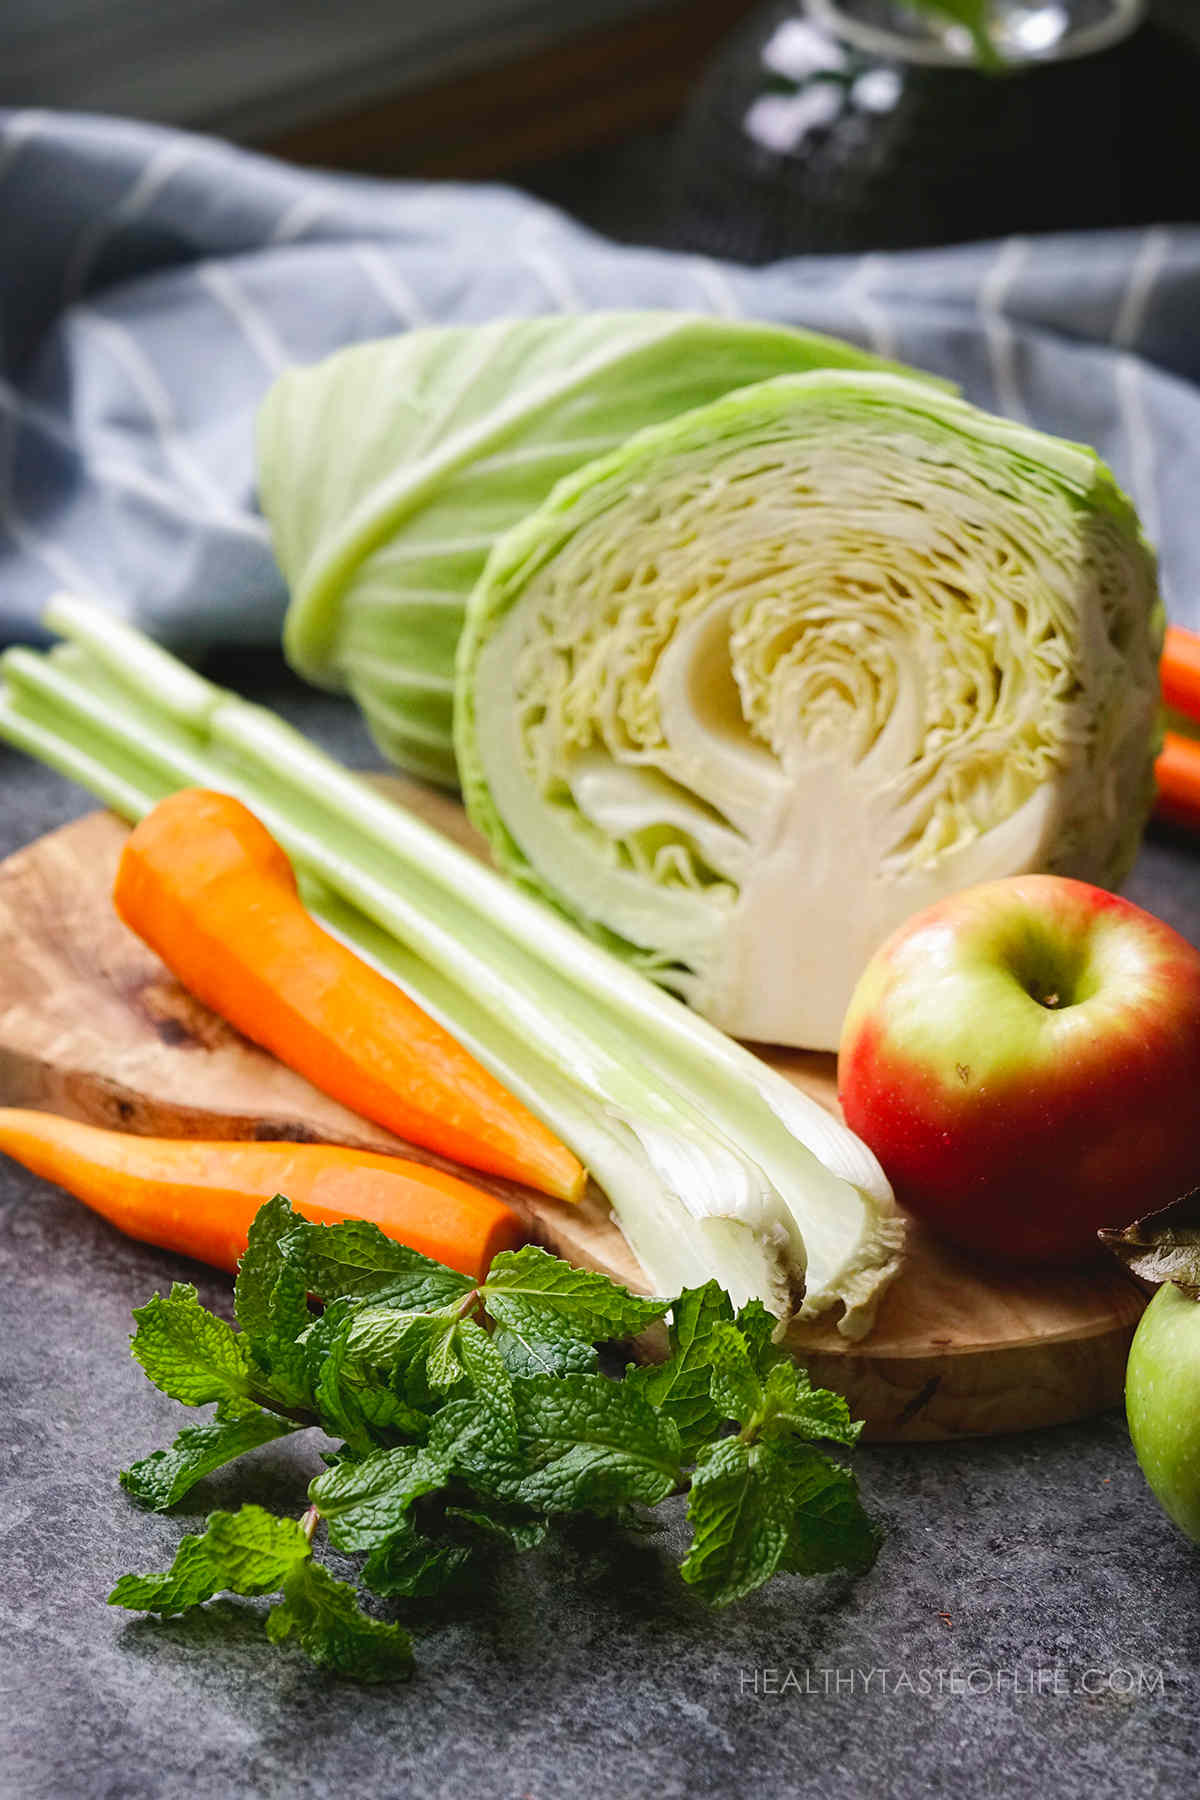 Cabbage juice for ulcers ingredients - cabbage, celery, carrot, apple and mint.